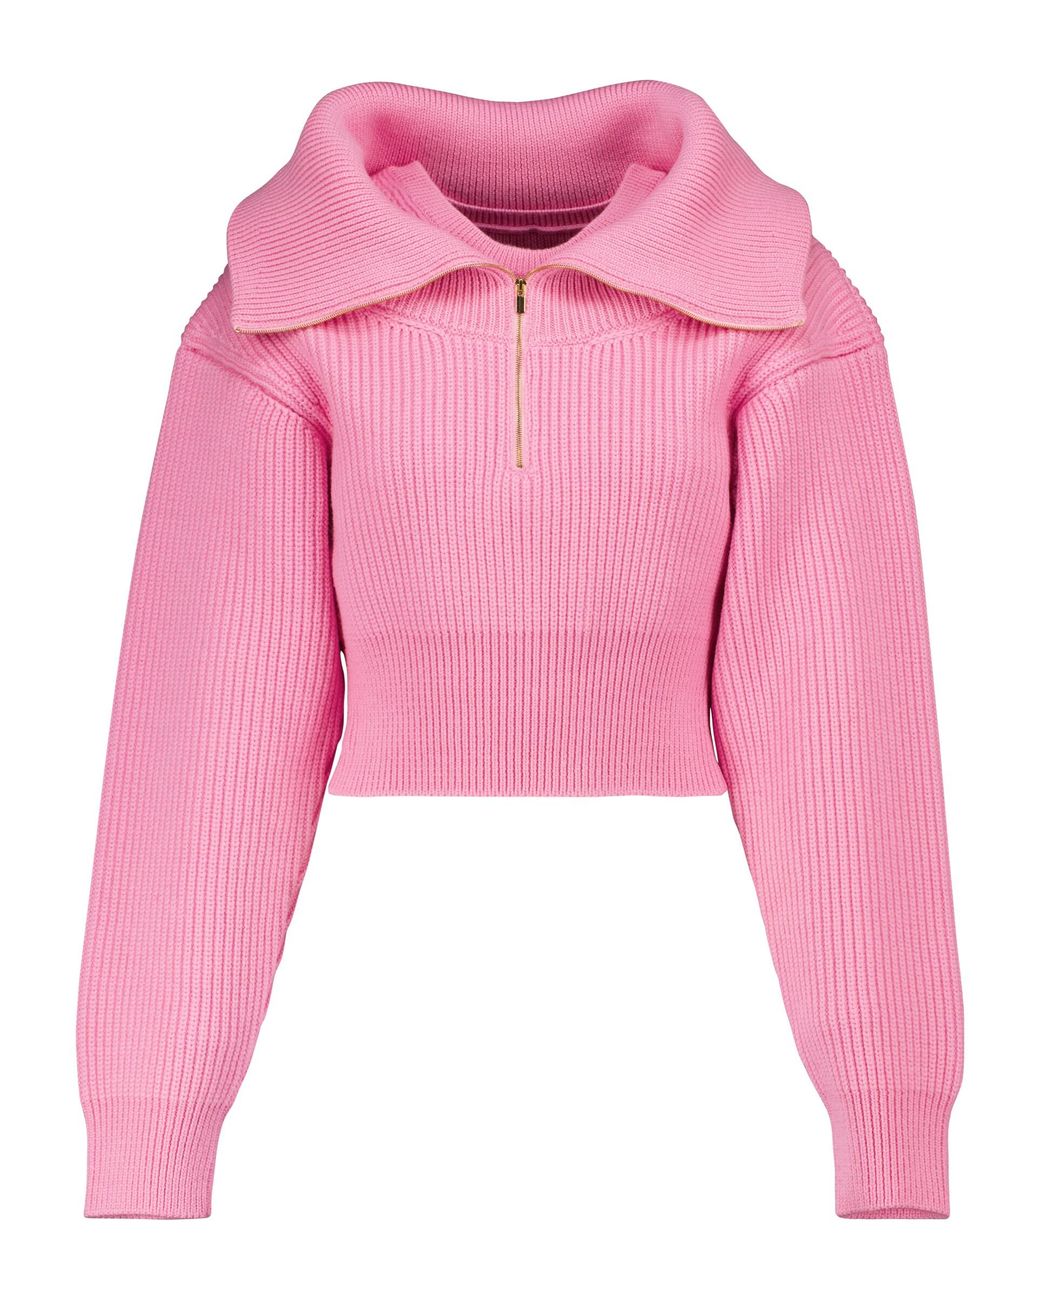 Jacquemus La Maille Risoul Cropped Wool Sweater in Pink | Lyst